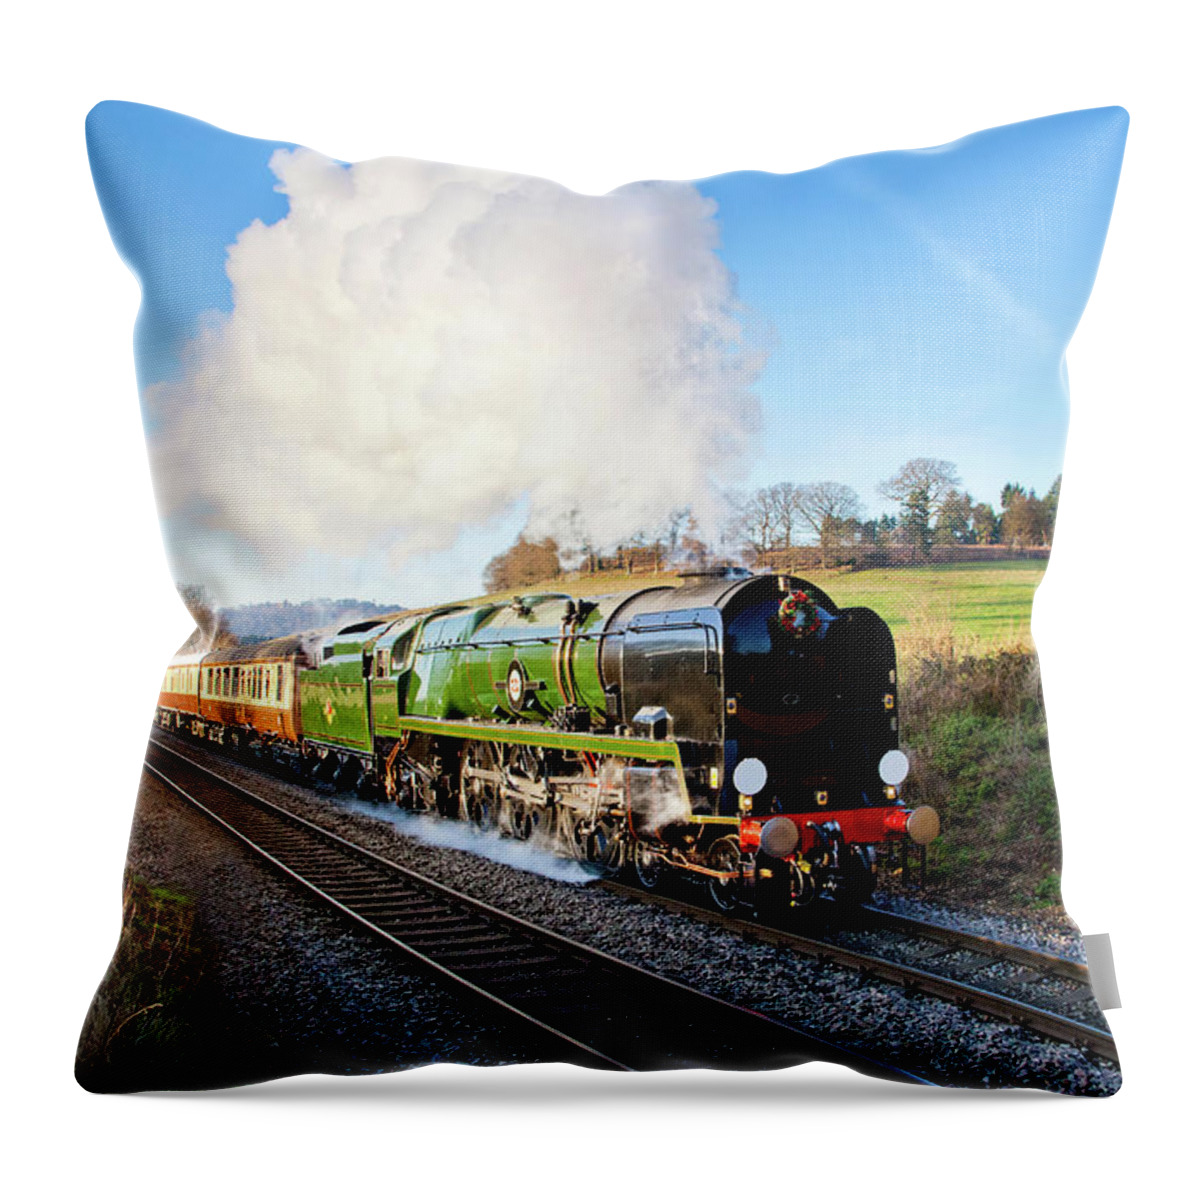 Tranquility Throw Pillow featuring the photograph Steam Train, Pulling The Orient Express by Tim Stocker Photography